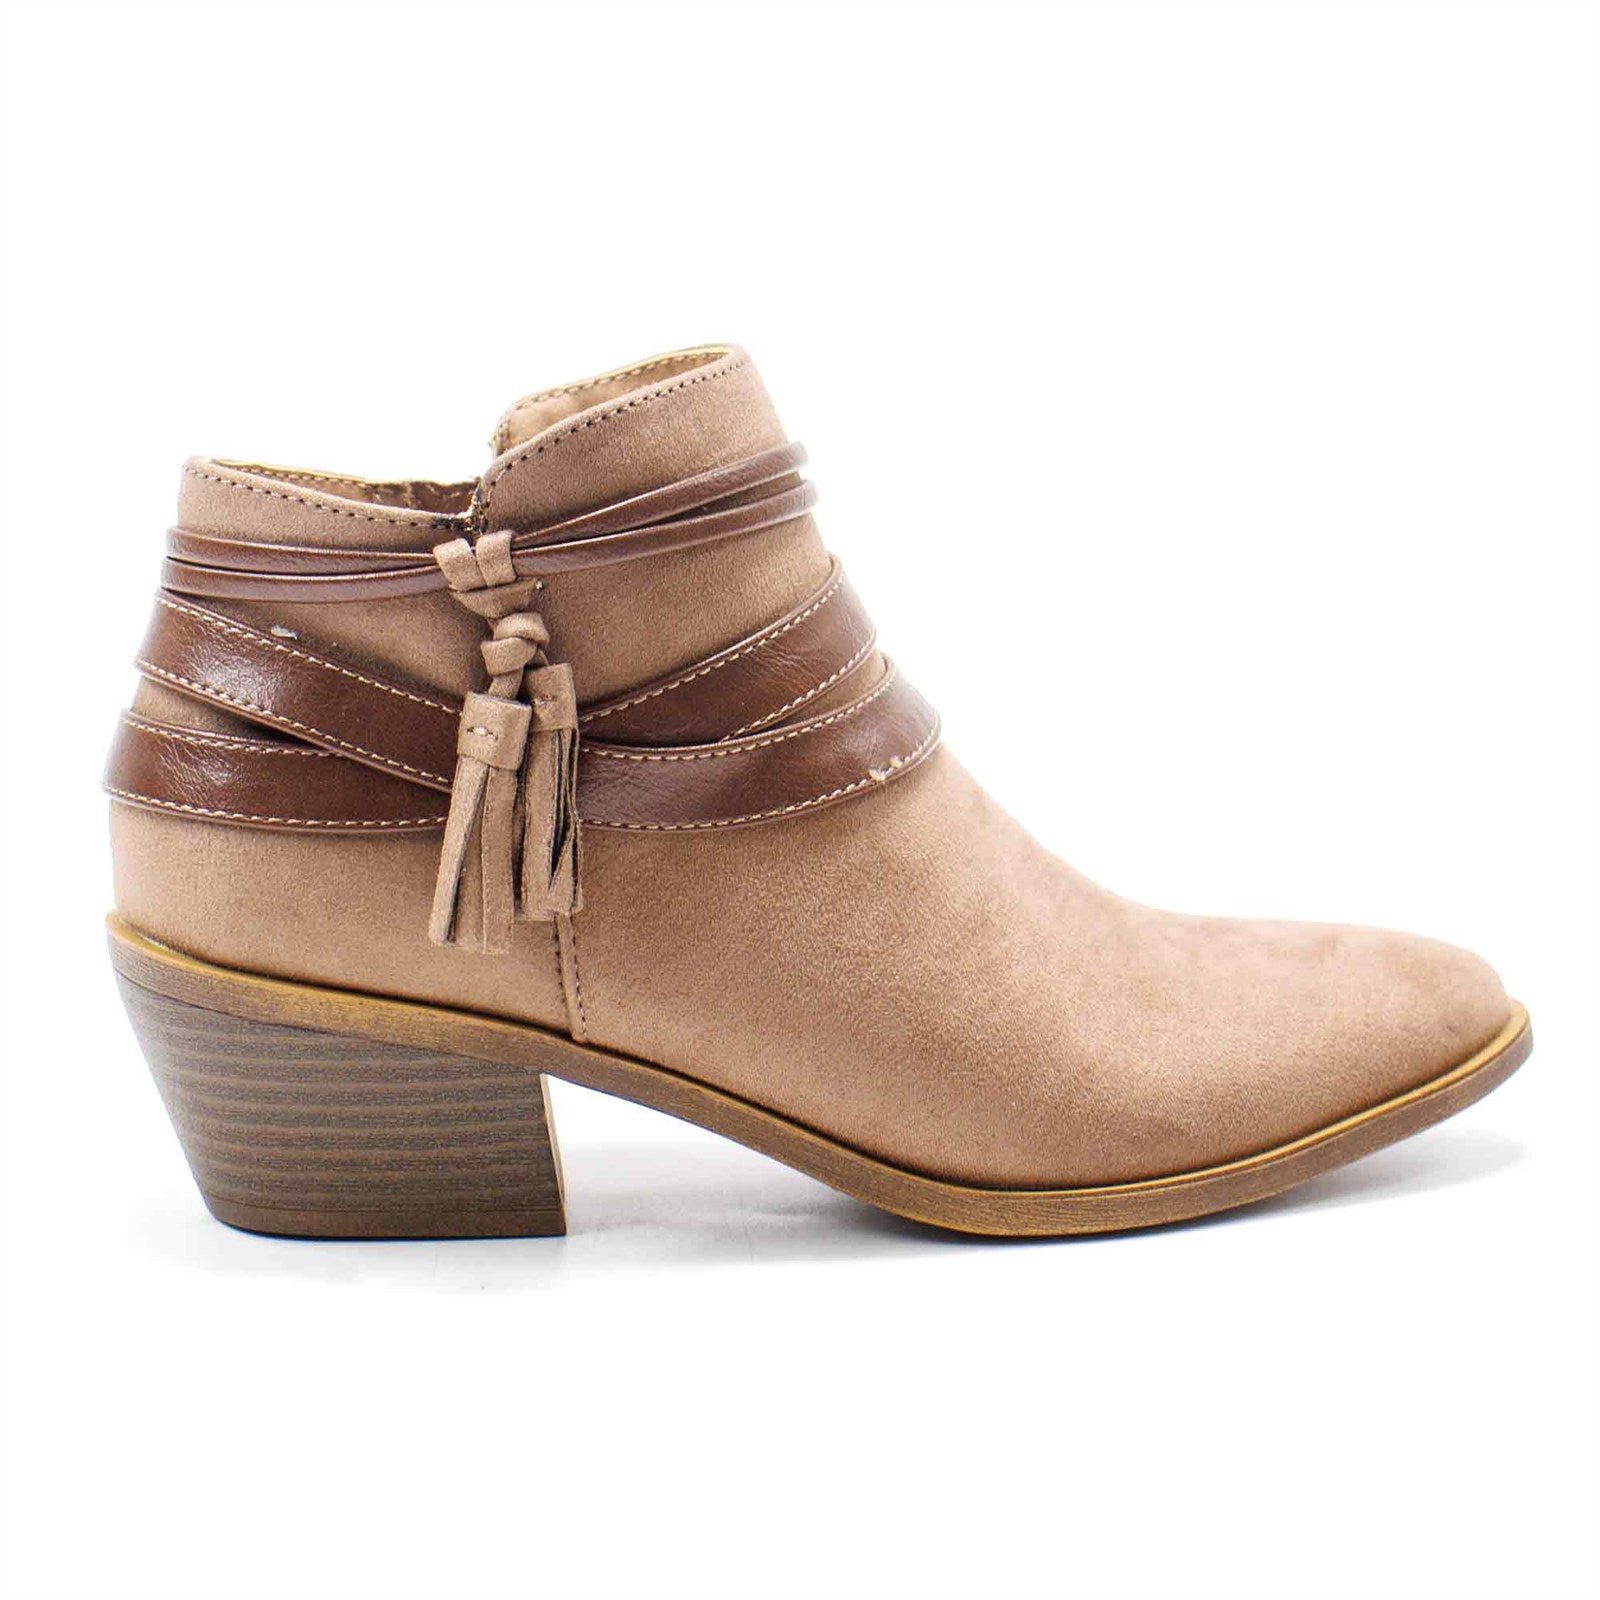 Lifestride Women Paloma Ankle Boots